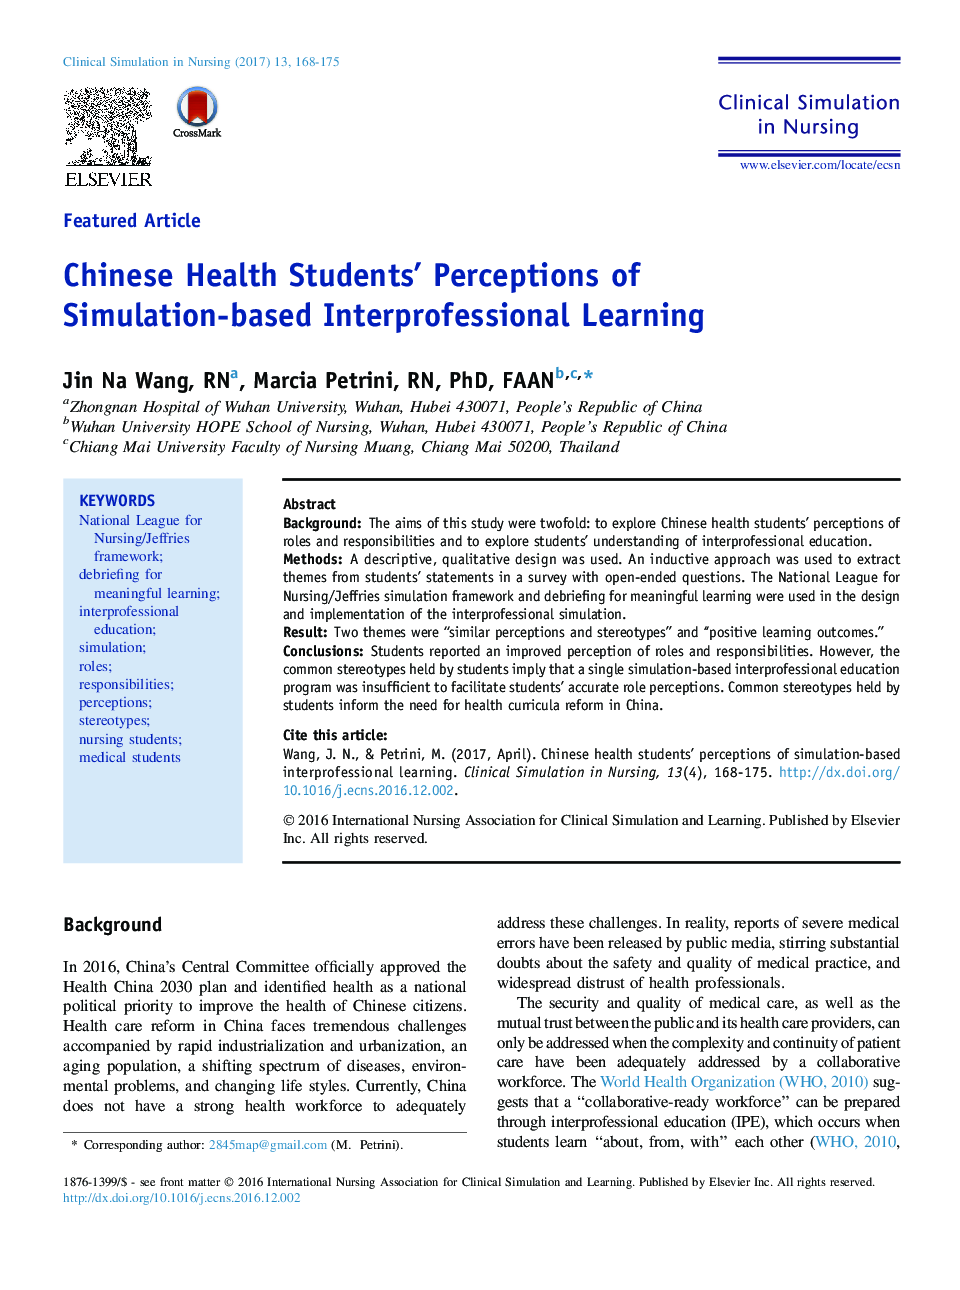 Chinese Health Students' Perceptions of Simulation-based Interprofessional Learning